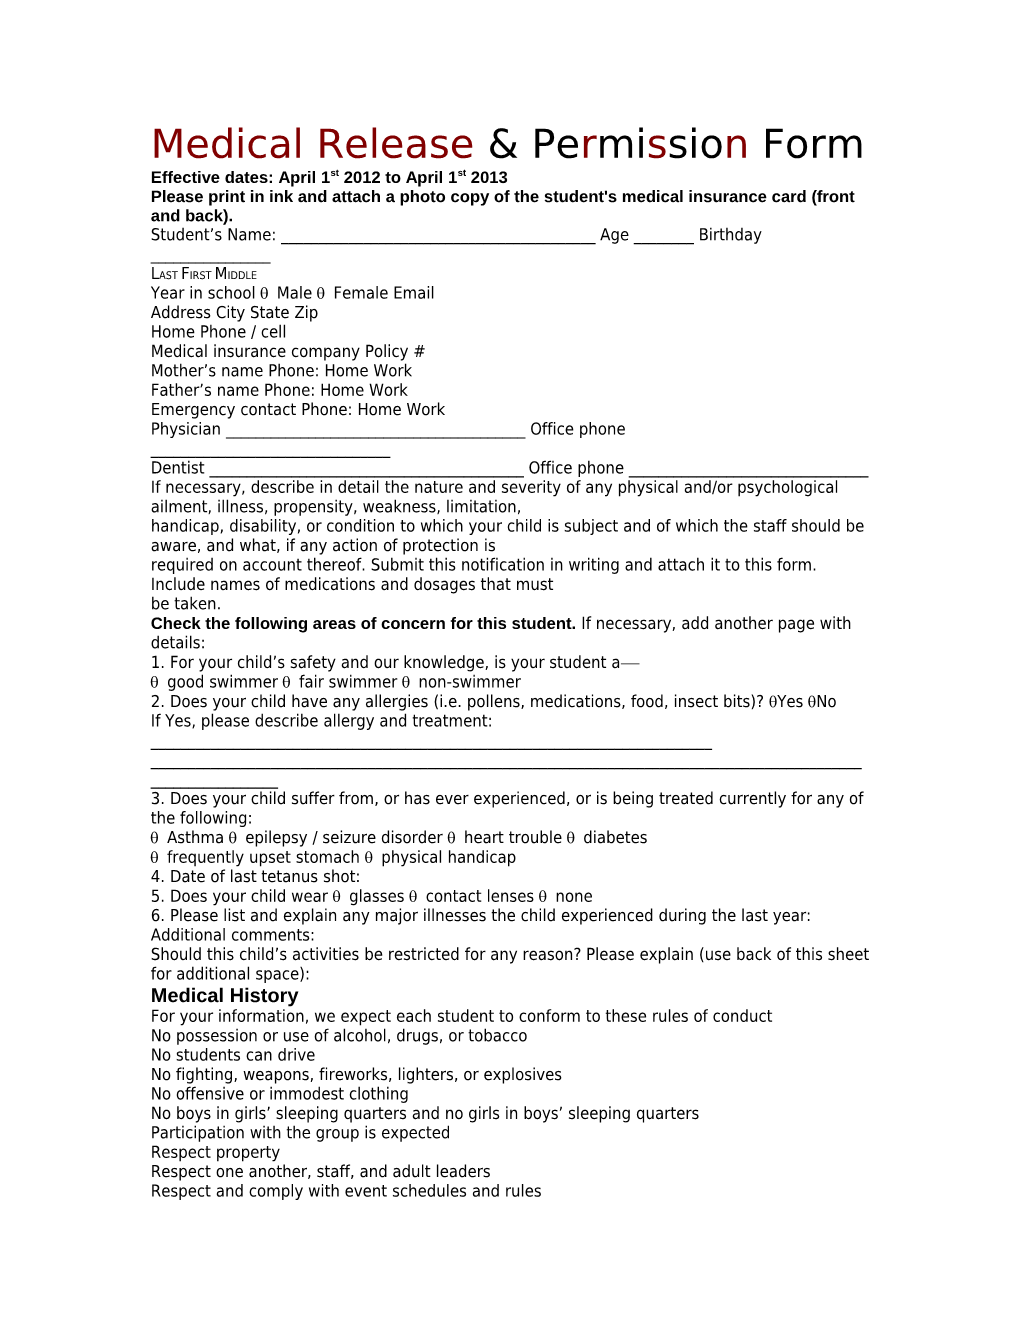 Medical Release & Permission Form